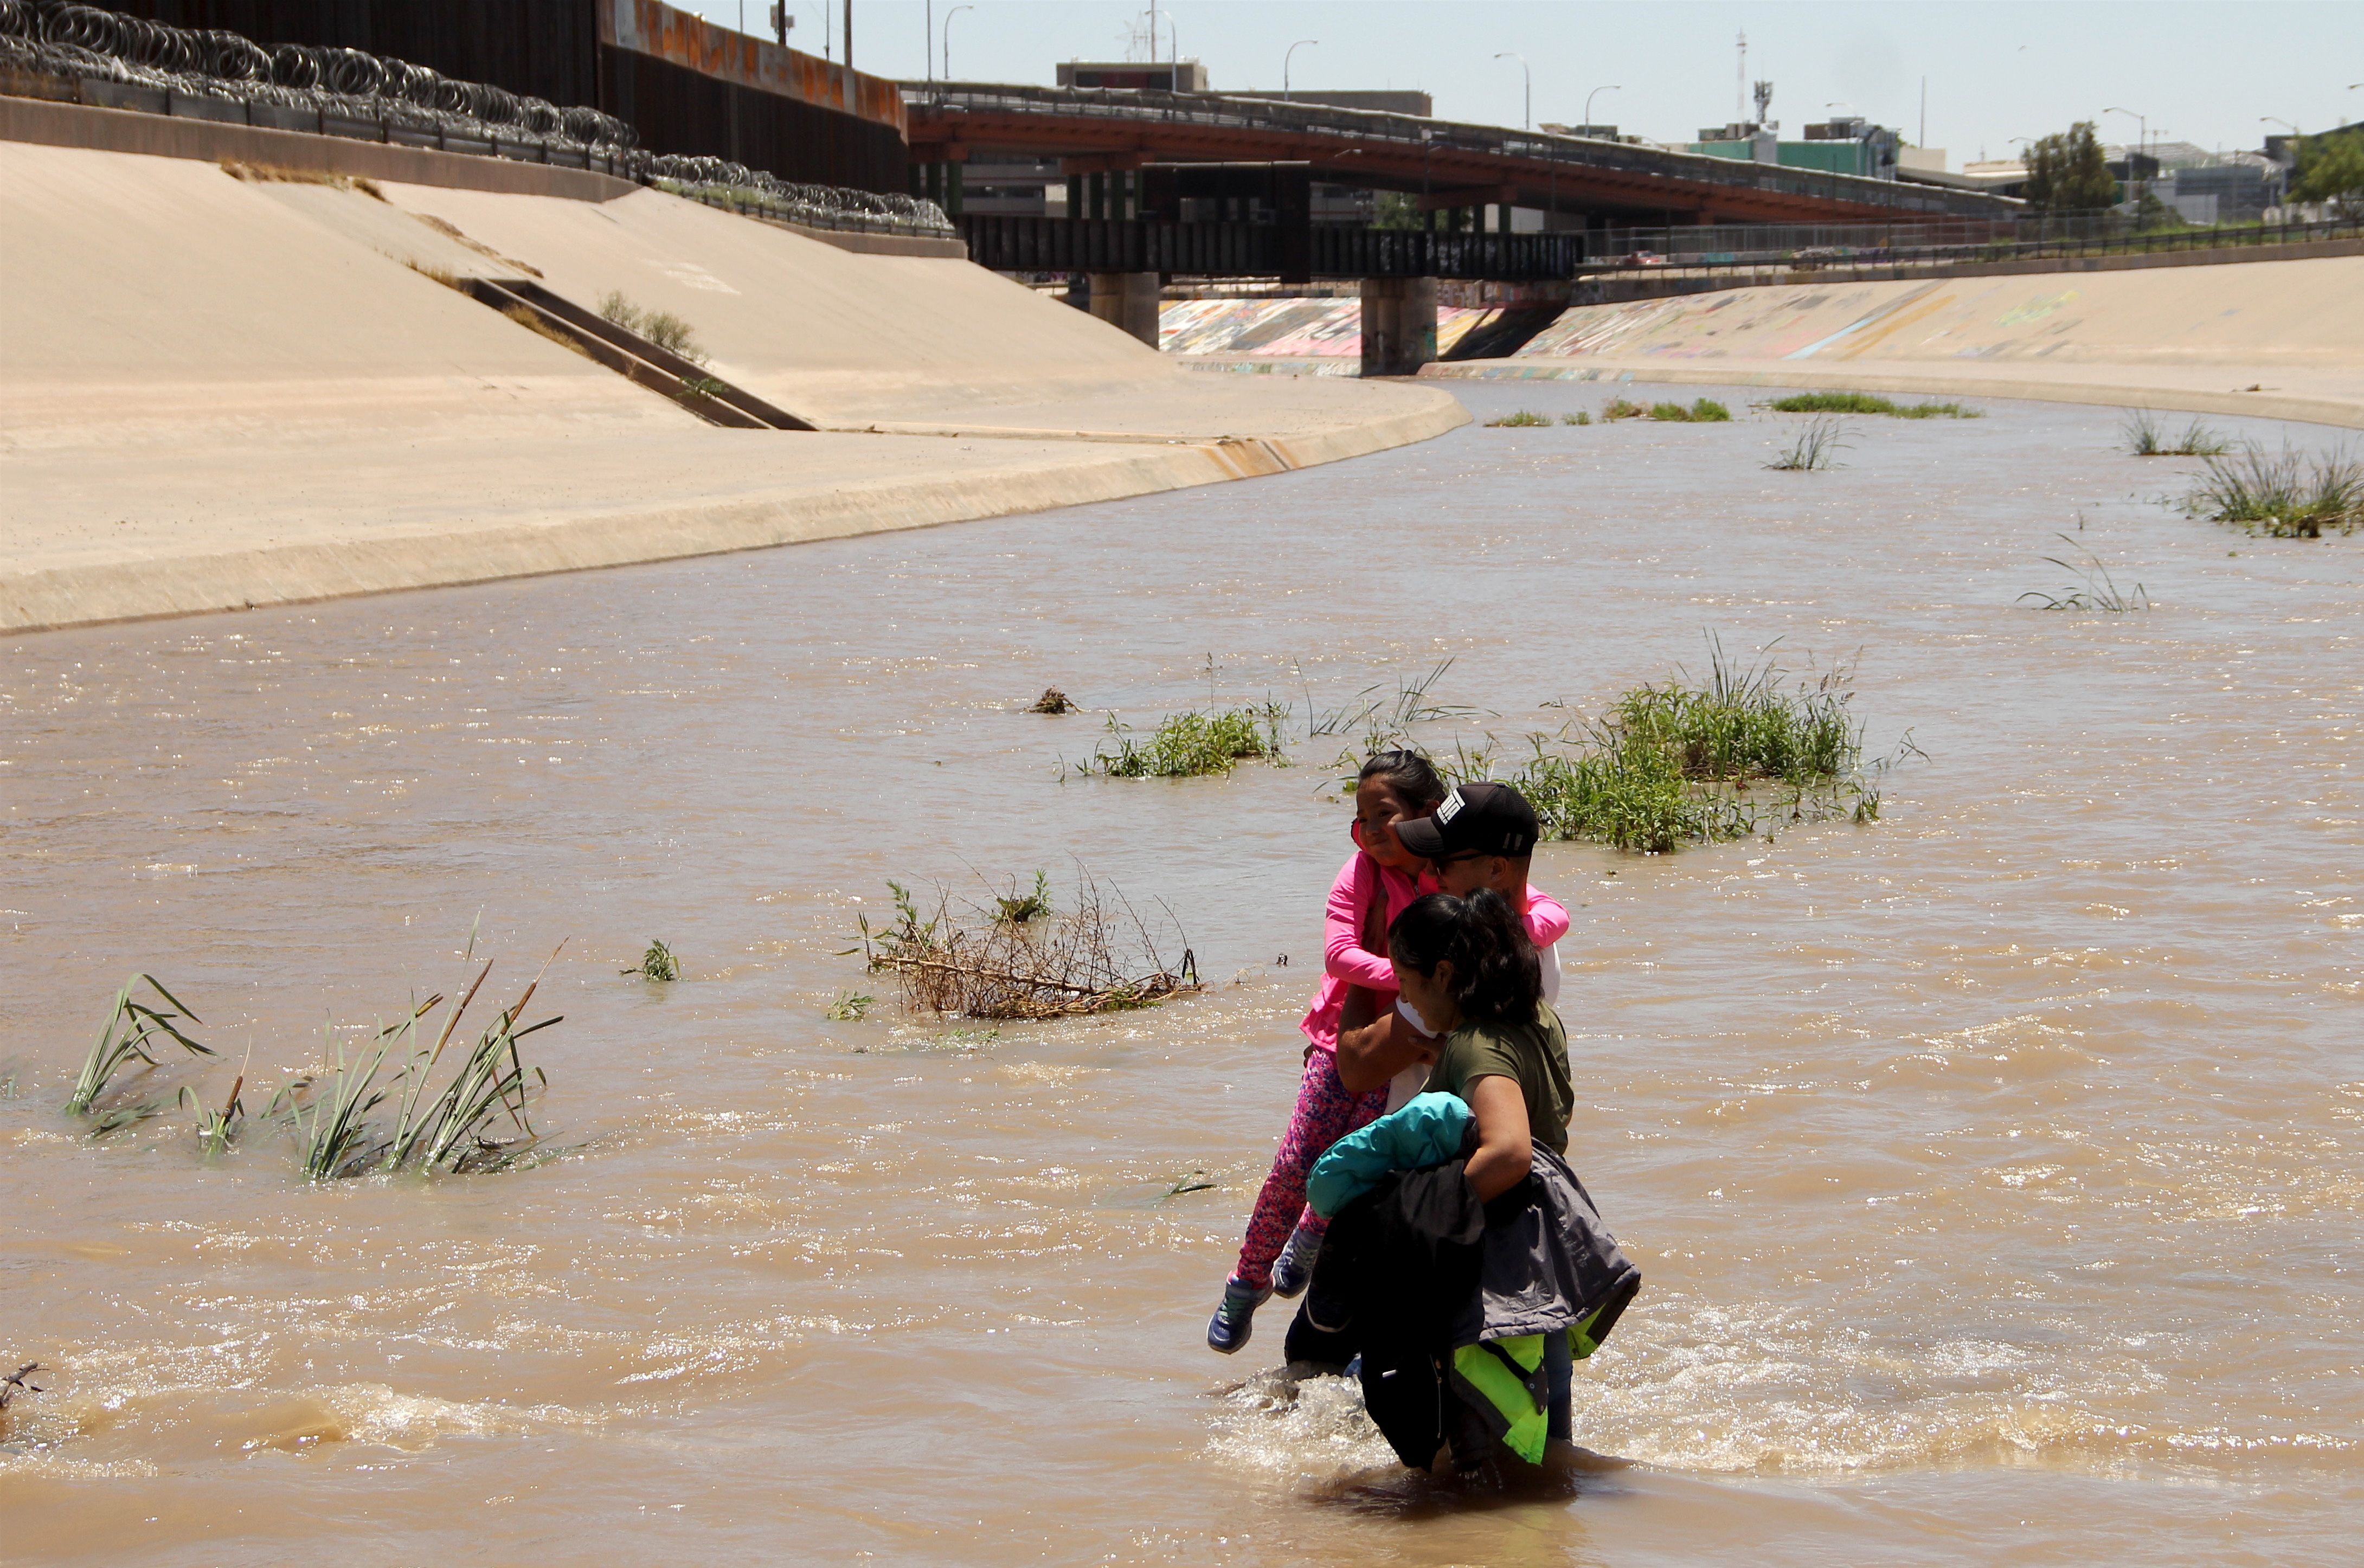 Central American migrants cross the Rio Grande in Ciudad Juarez, on June 12, 2019, before turning themselves into U.S. Border Patrol agents to claim asylum. (Herika Martinez&mdash;AFP/Getty Images)